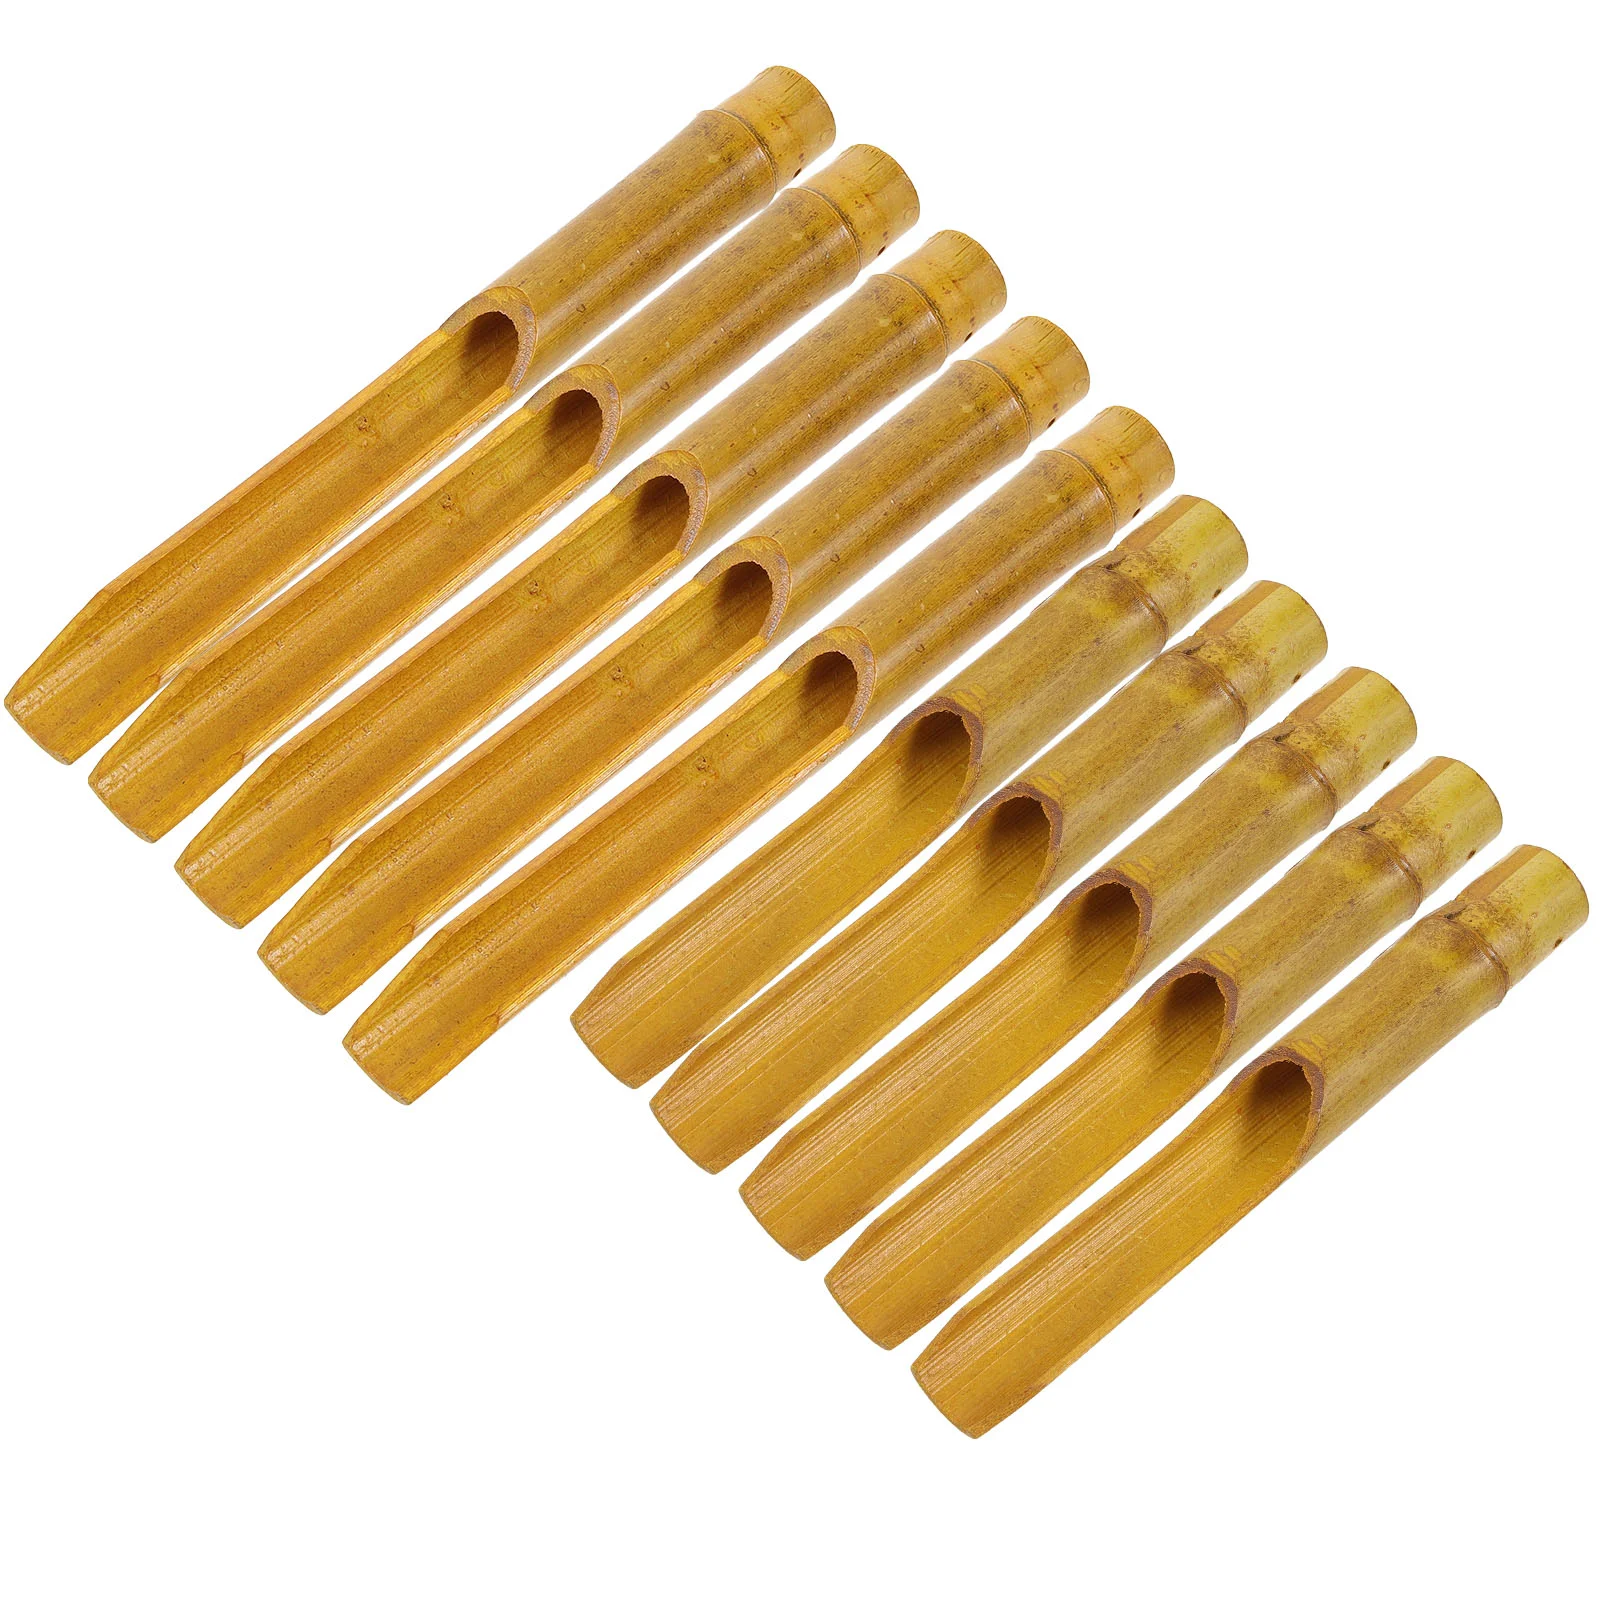 

10 Pcs Wooden Ball Bamboo Wind Chimes Fittings Balls Crafts Musical Pipes 20 Bell Accessories